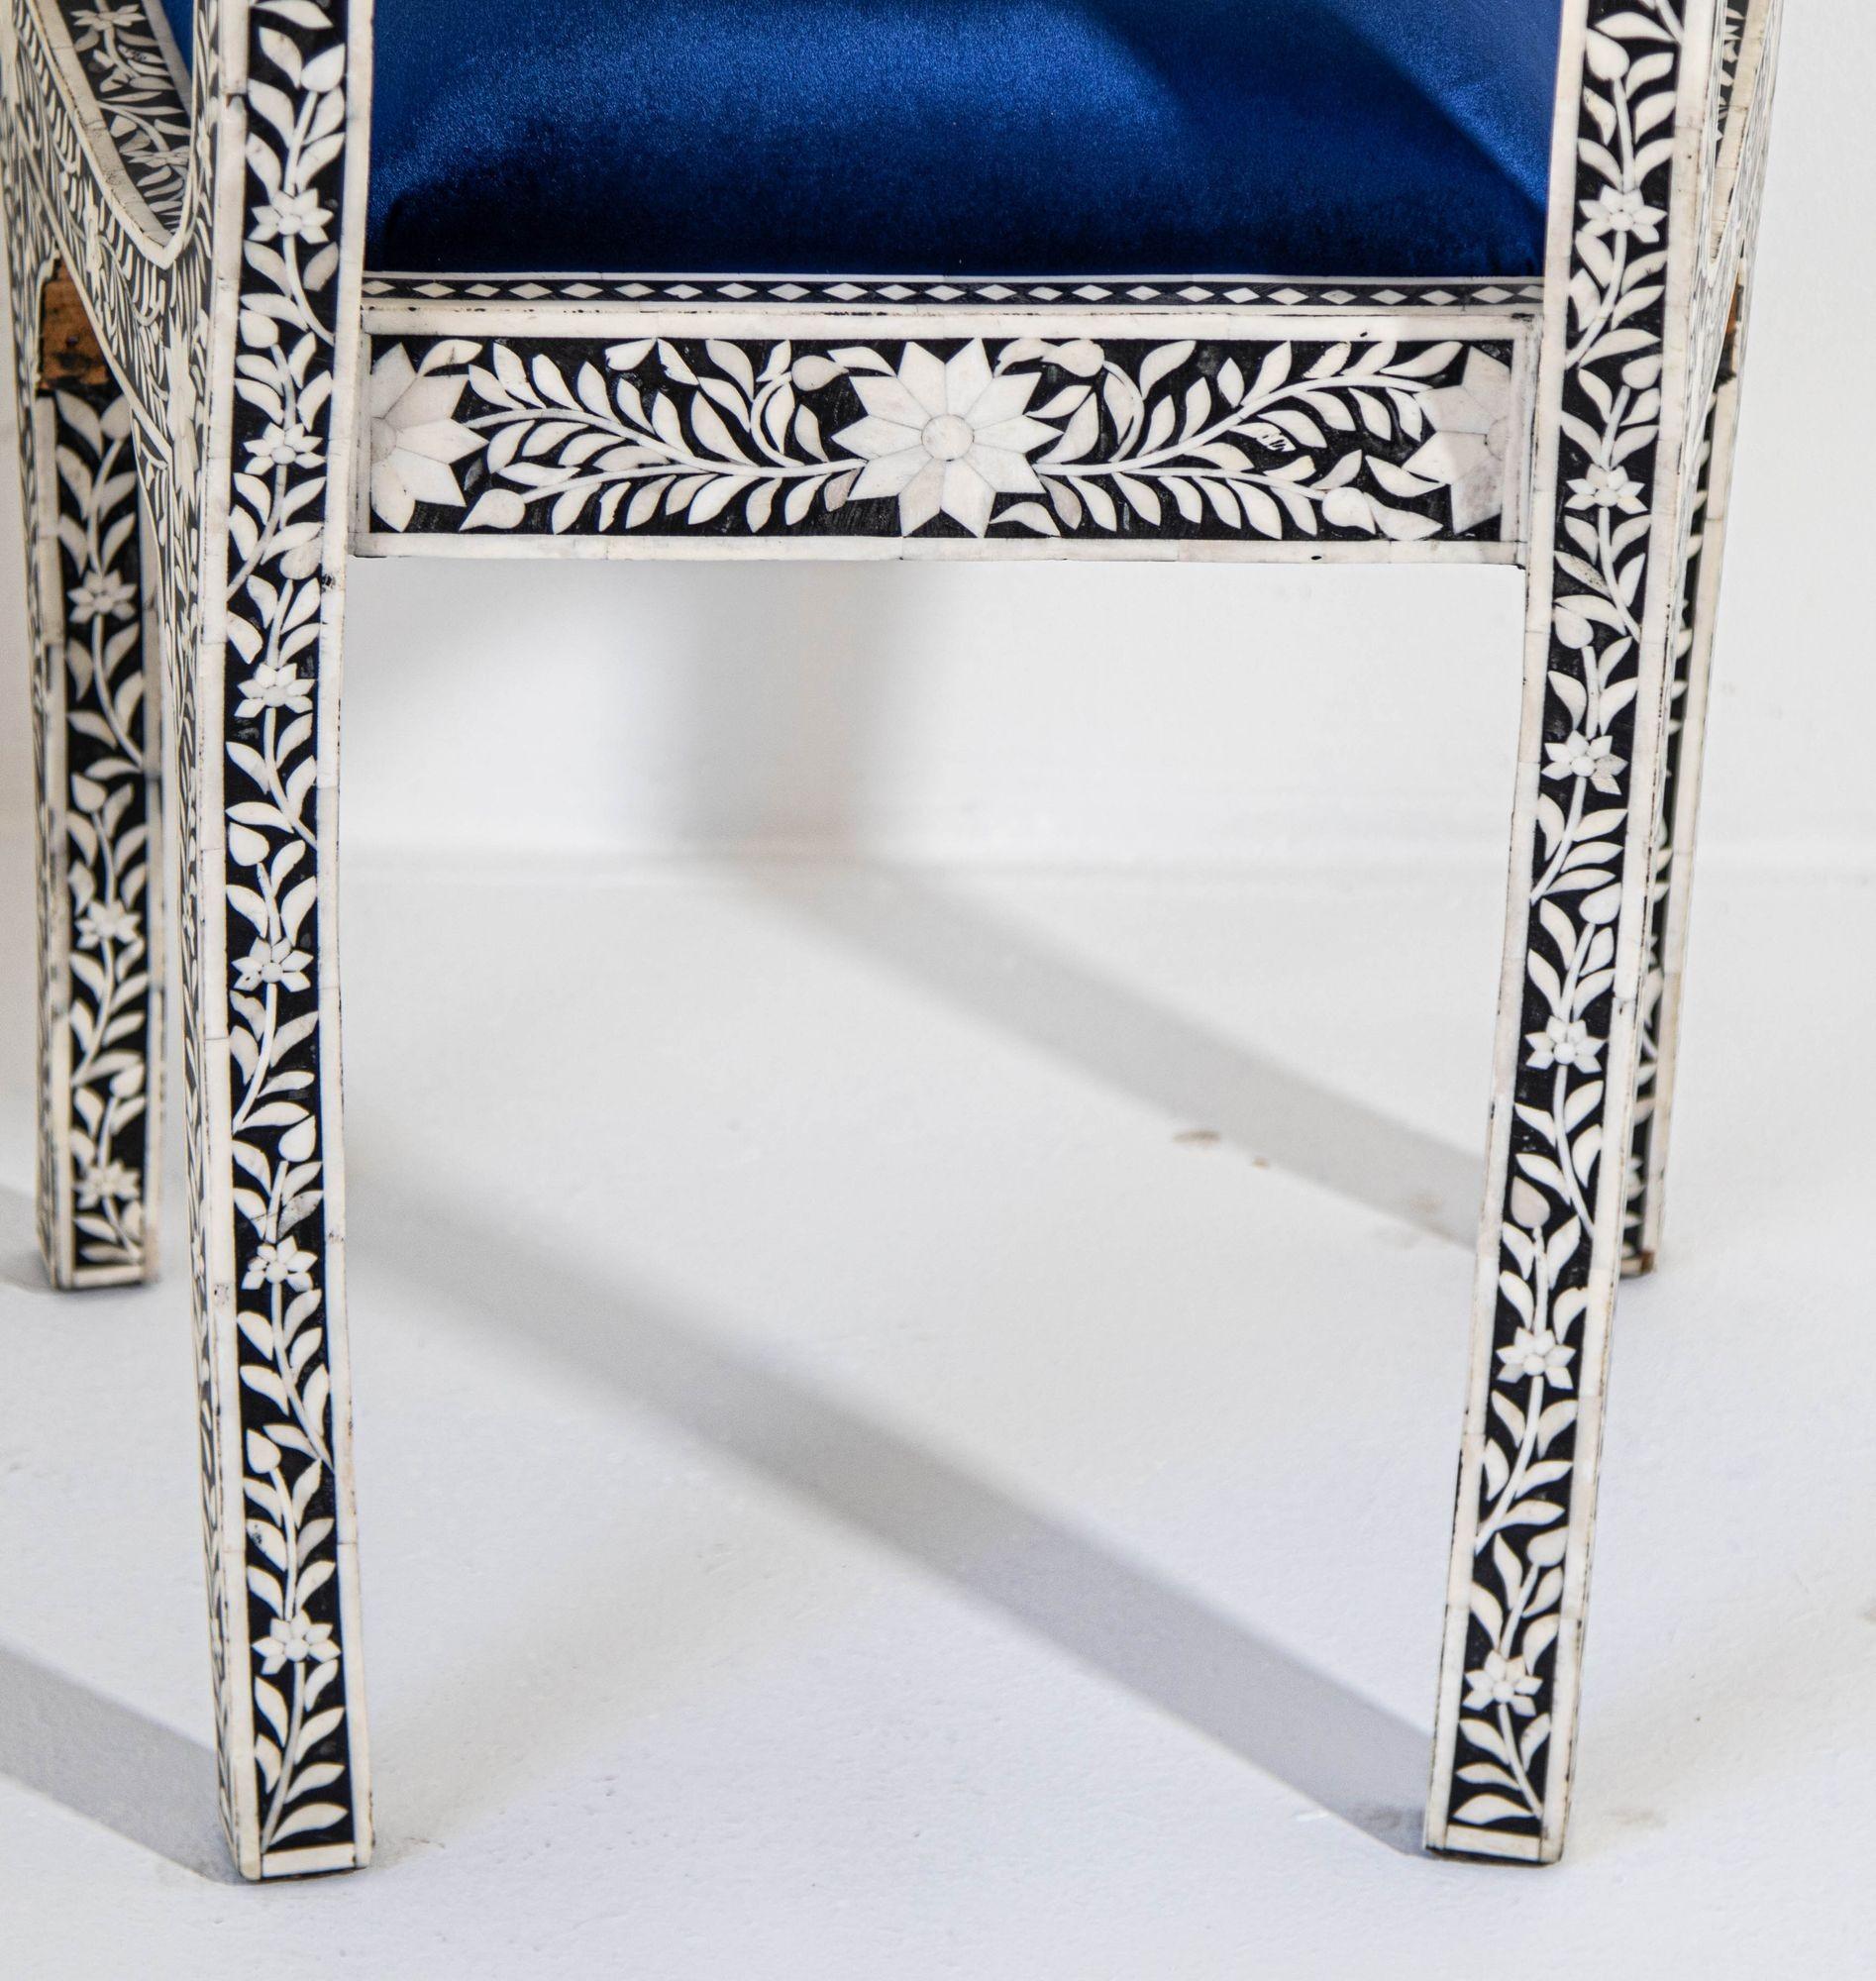 Antique Anglo-Indian Side Chairs with Ram's Head Bone Inlay Royal Blue Seat Pair For Sale 9